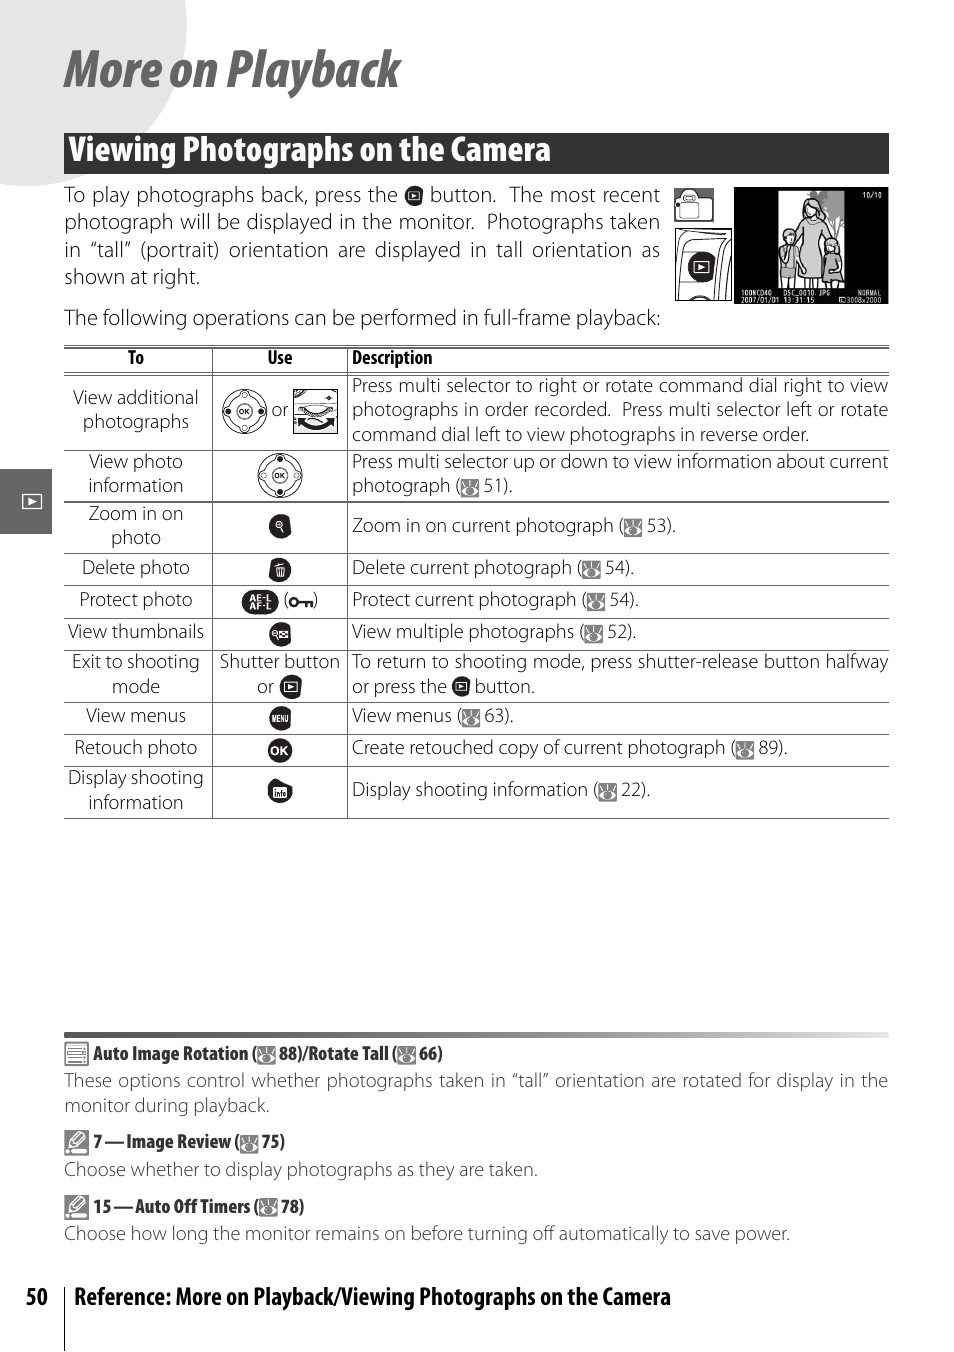 More on playback, Viewing photographs on the camera | Nikon D40 User Manual | Page 62 / 139